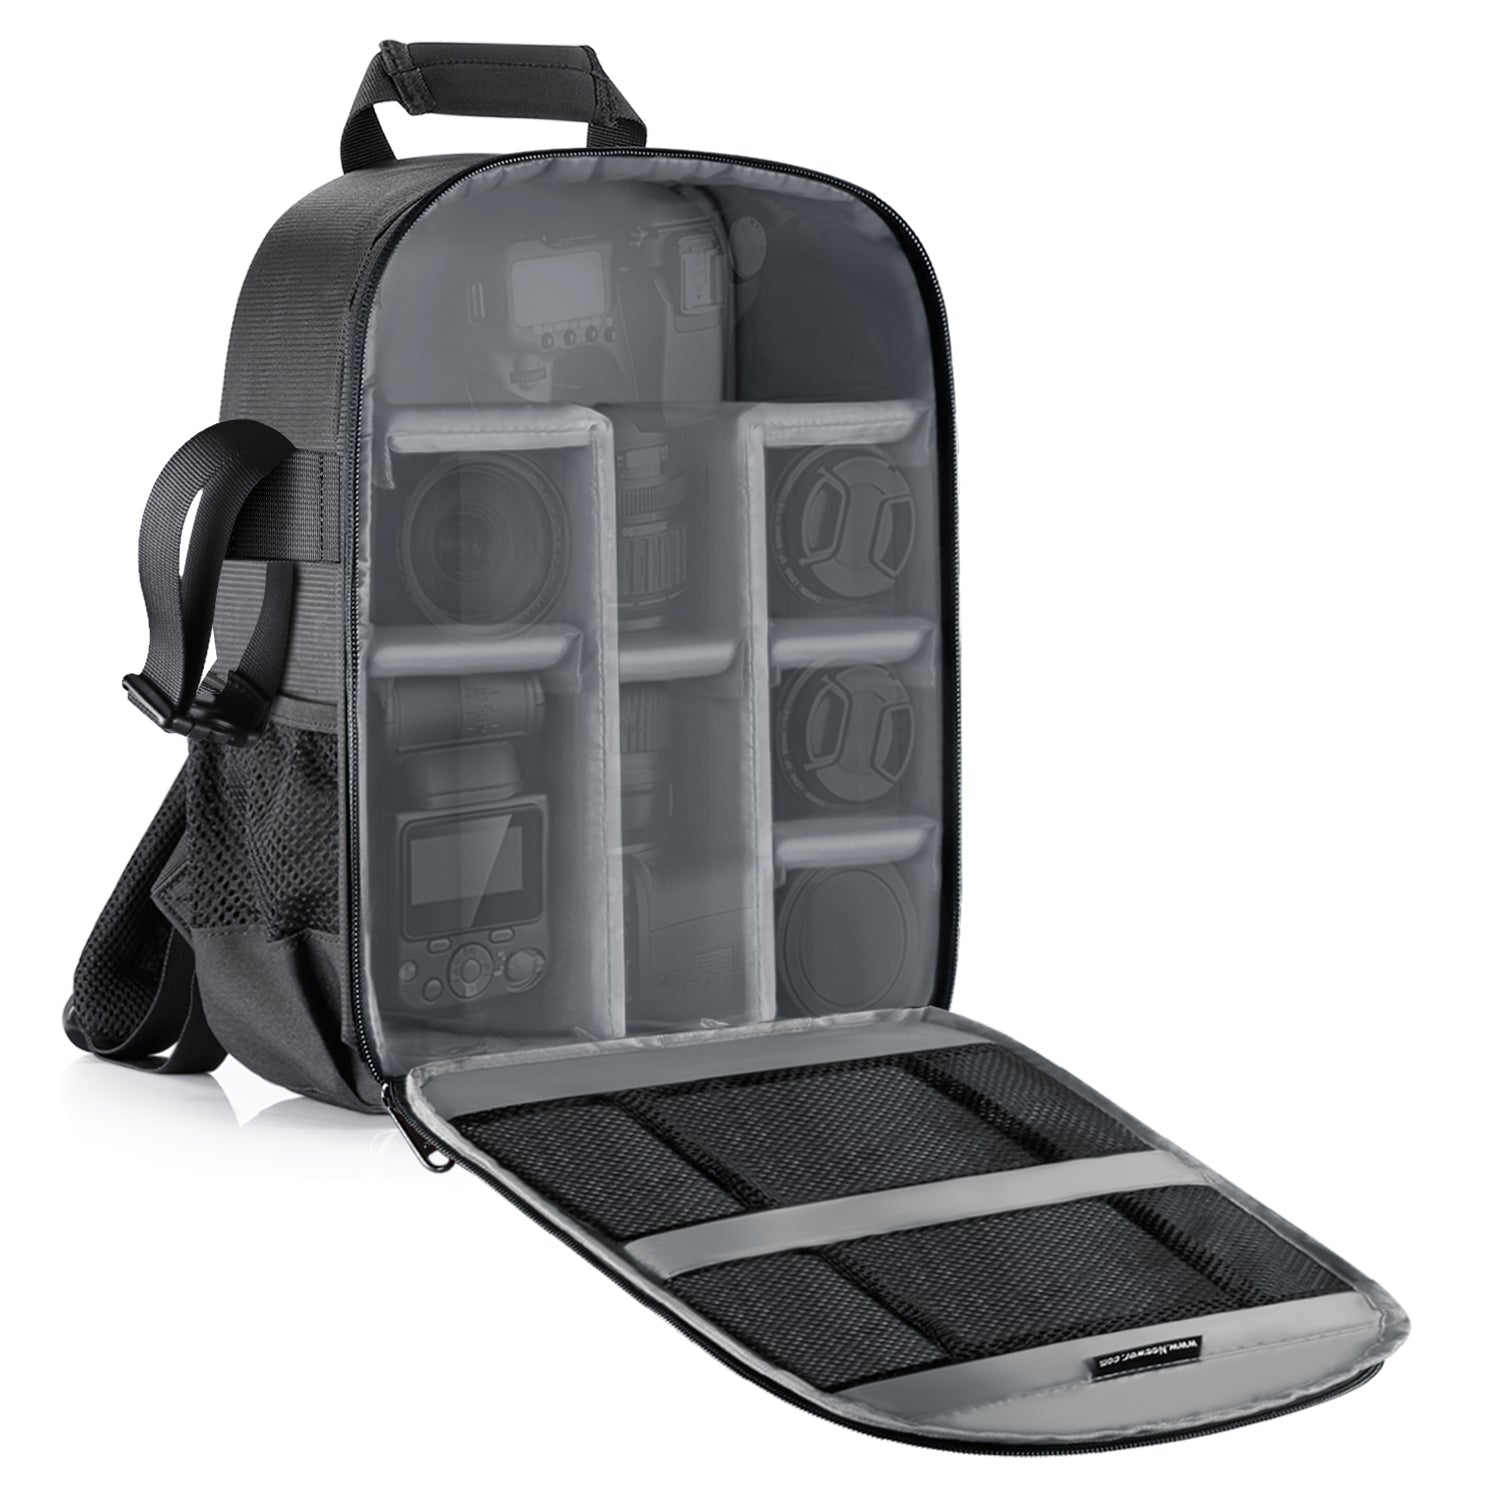 Neewer Camera Case Water-Resistant Shockproof 11.8x5.5x14.6 inches/30x14x37 cm Backpack